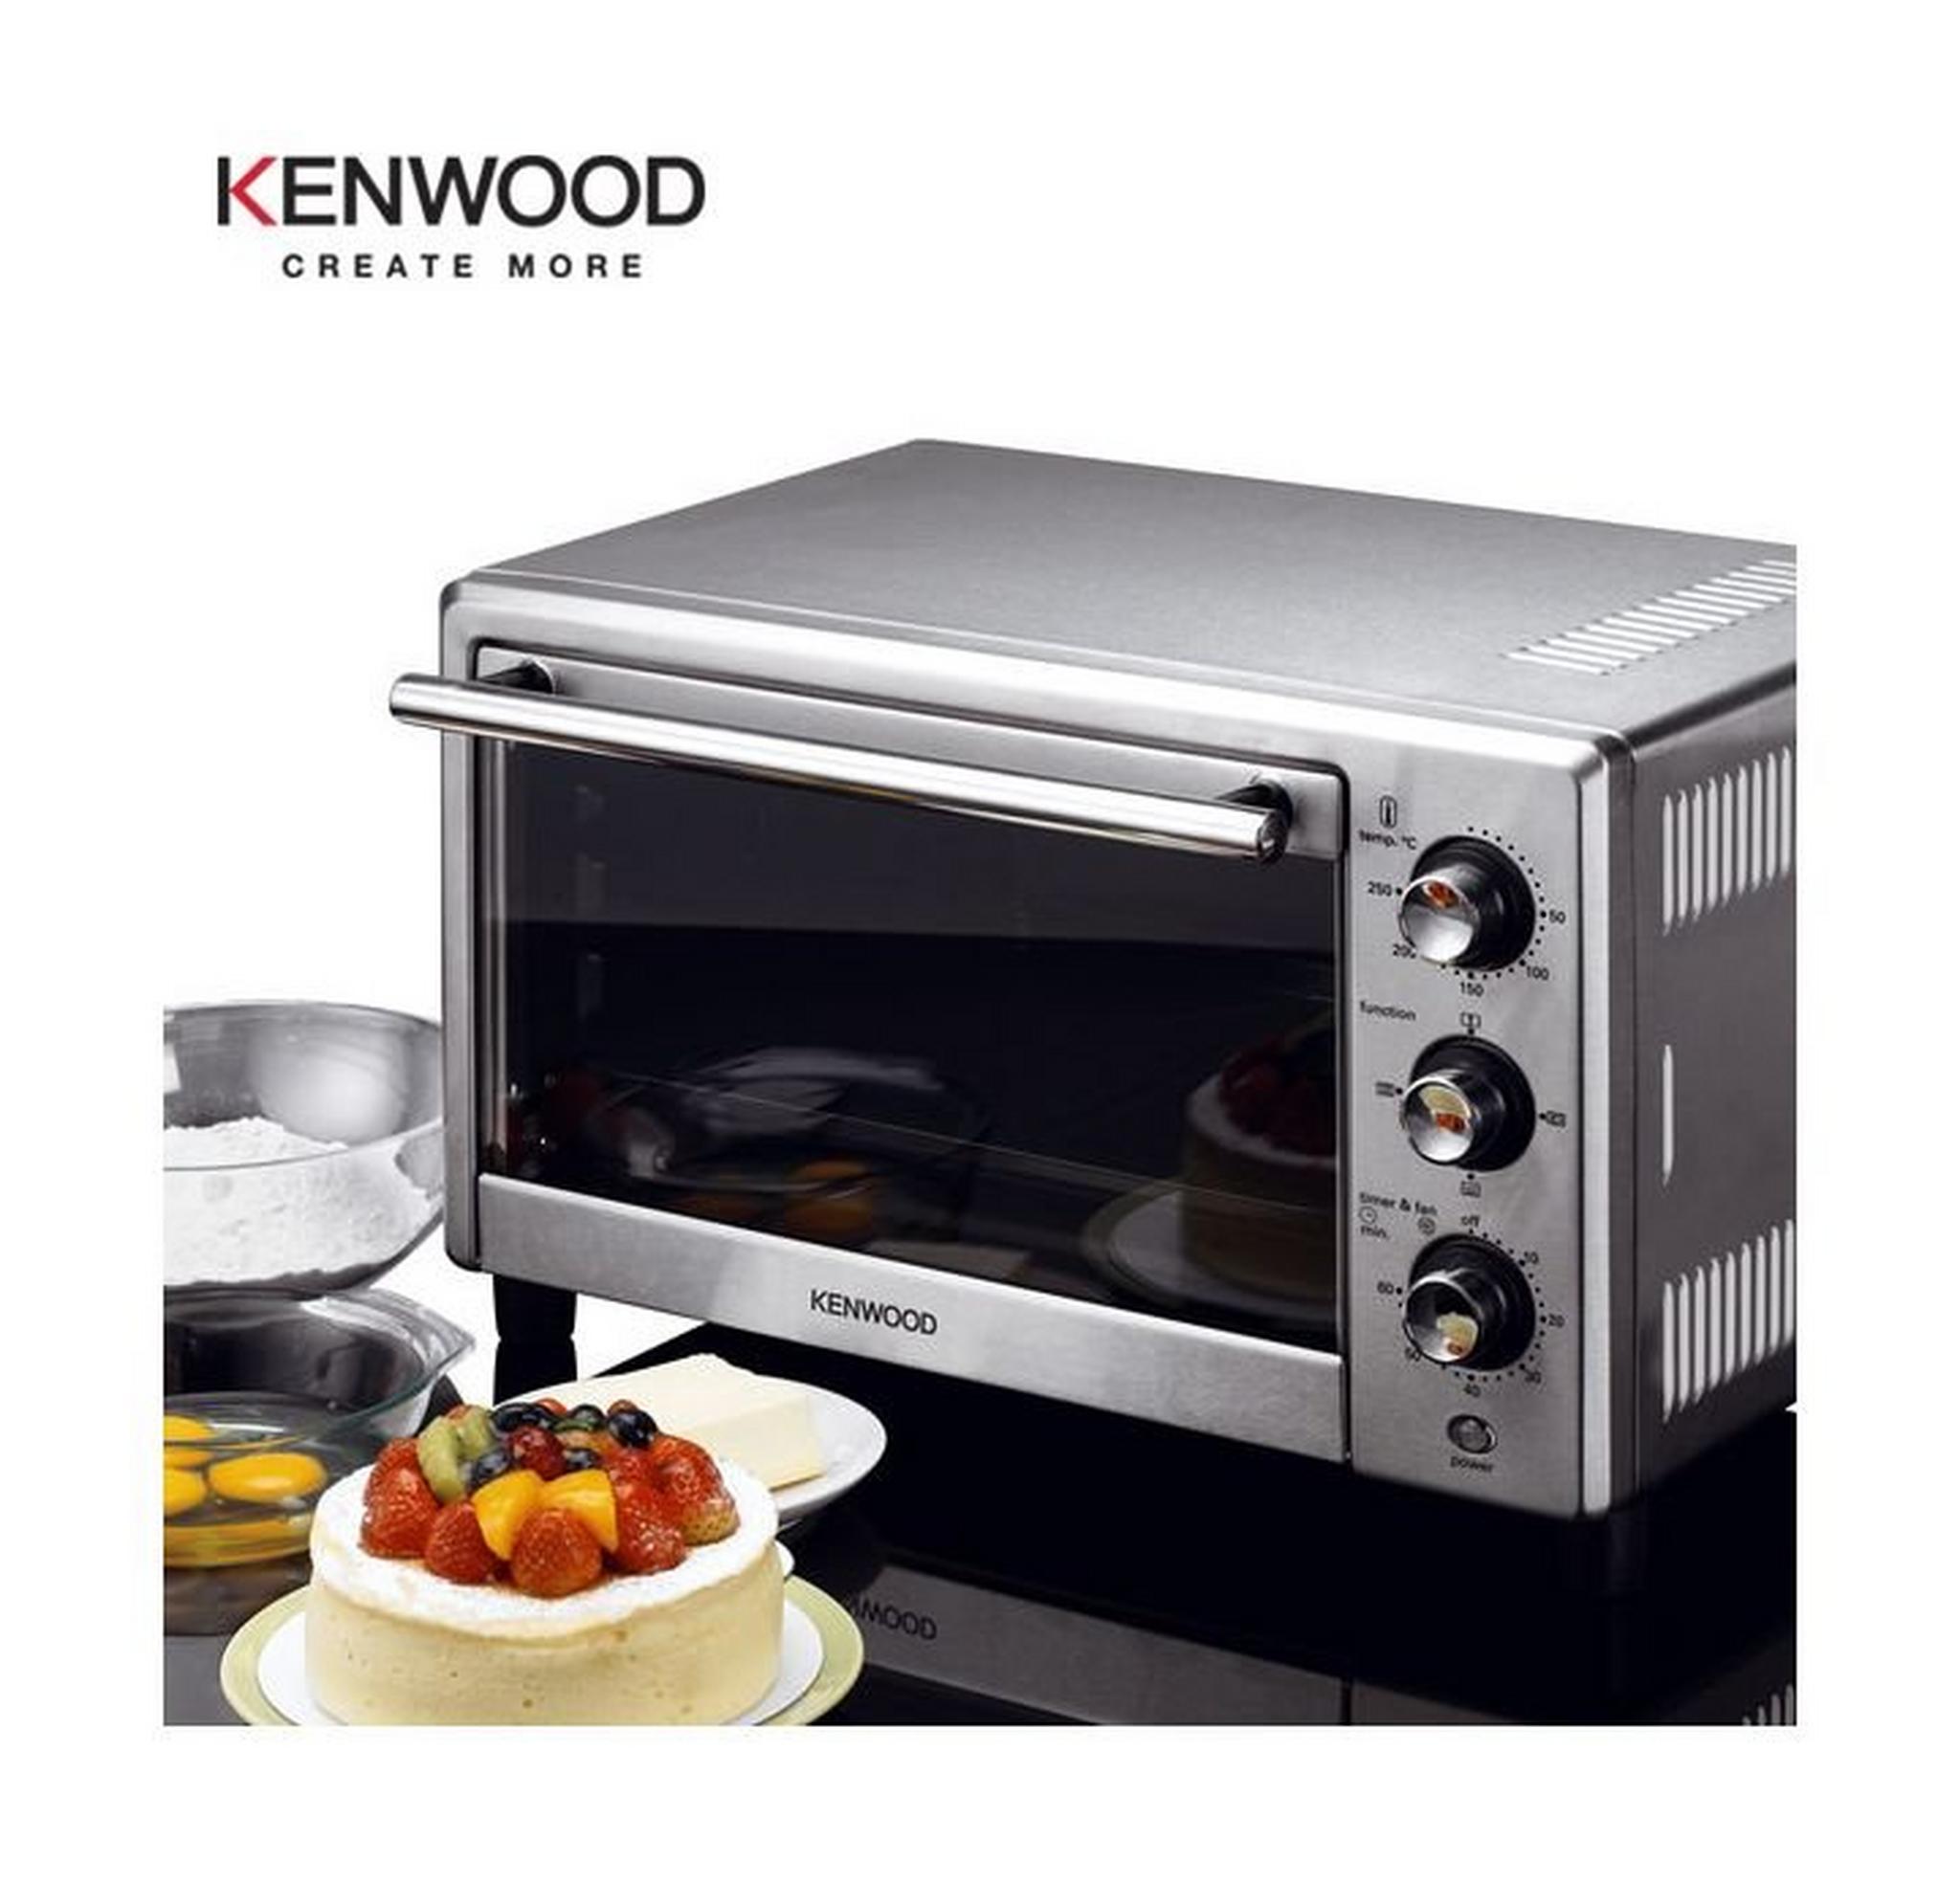 Kenwood 1900W 25L Electric Oven (MO746) – Silver